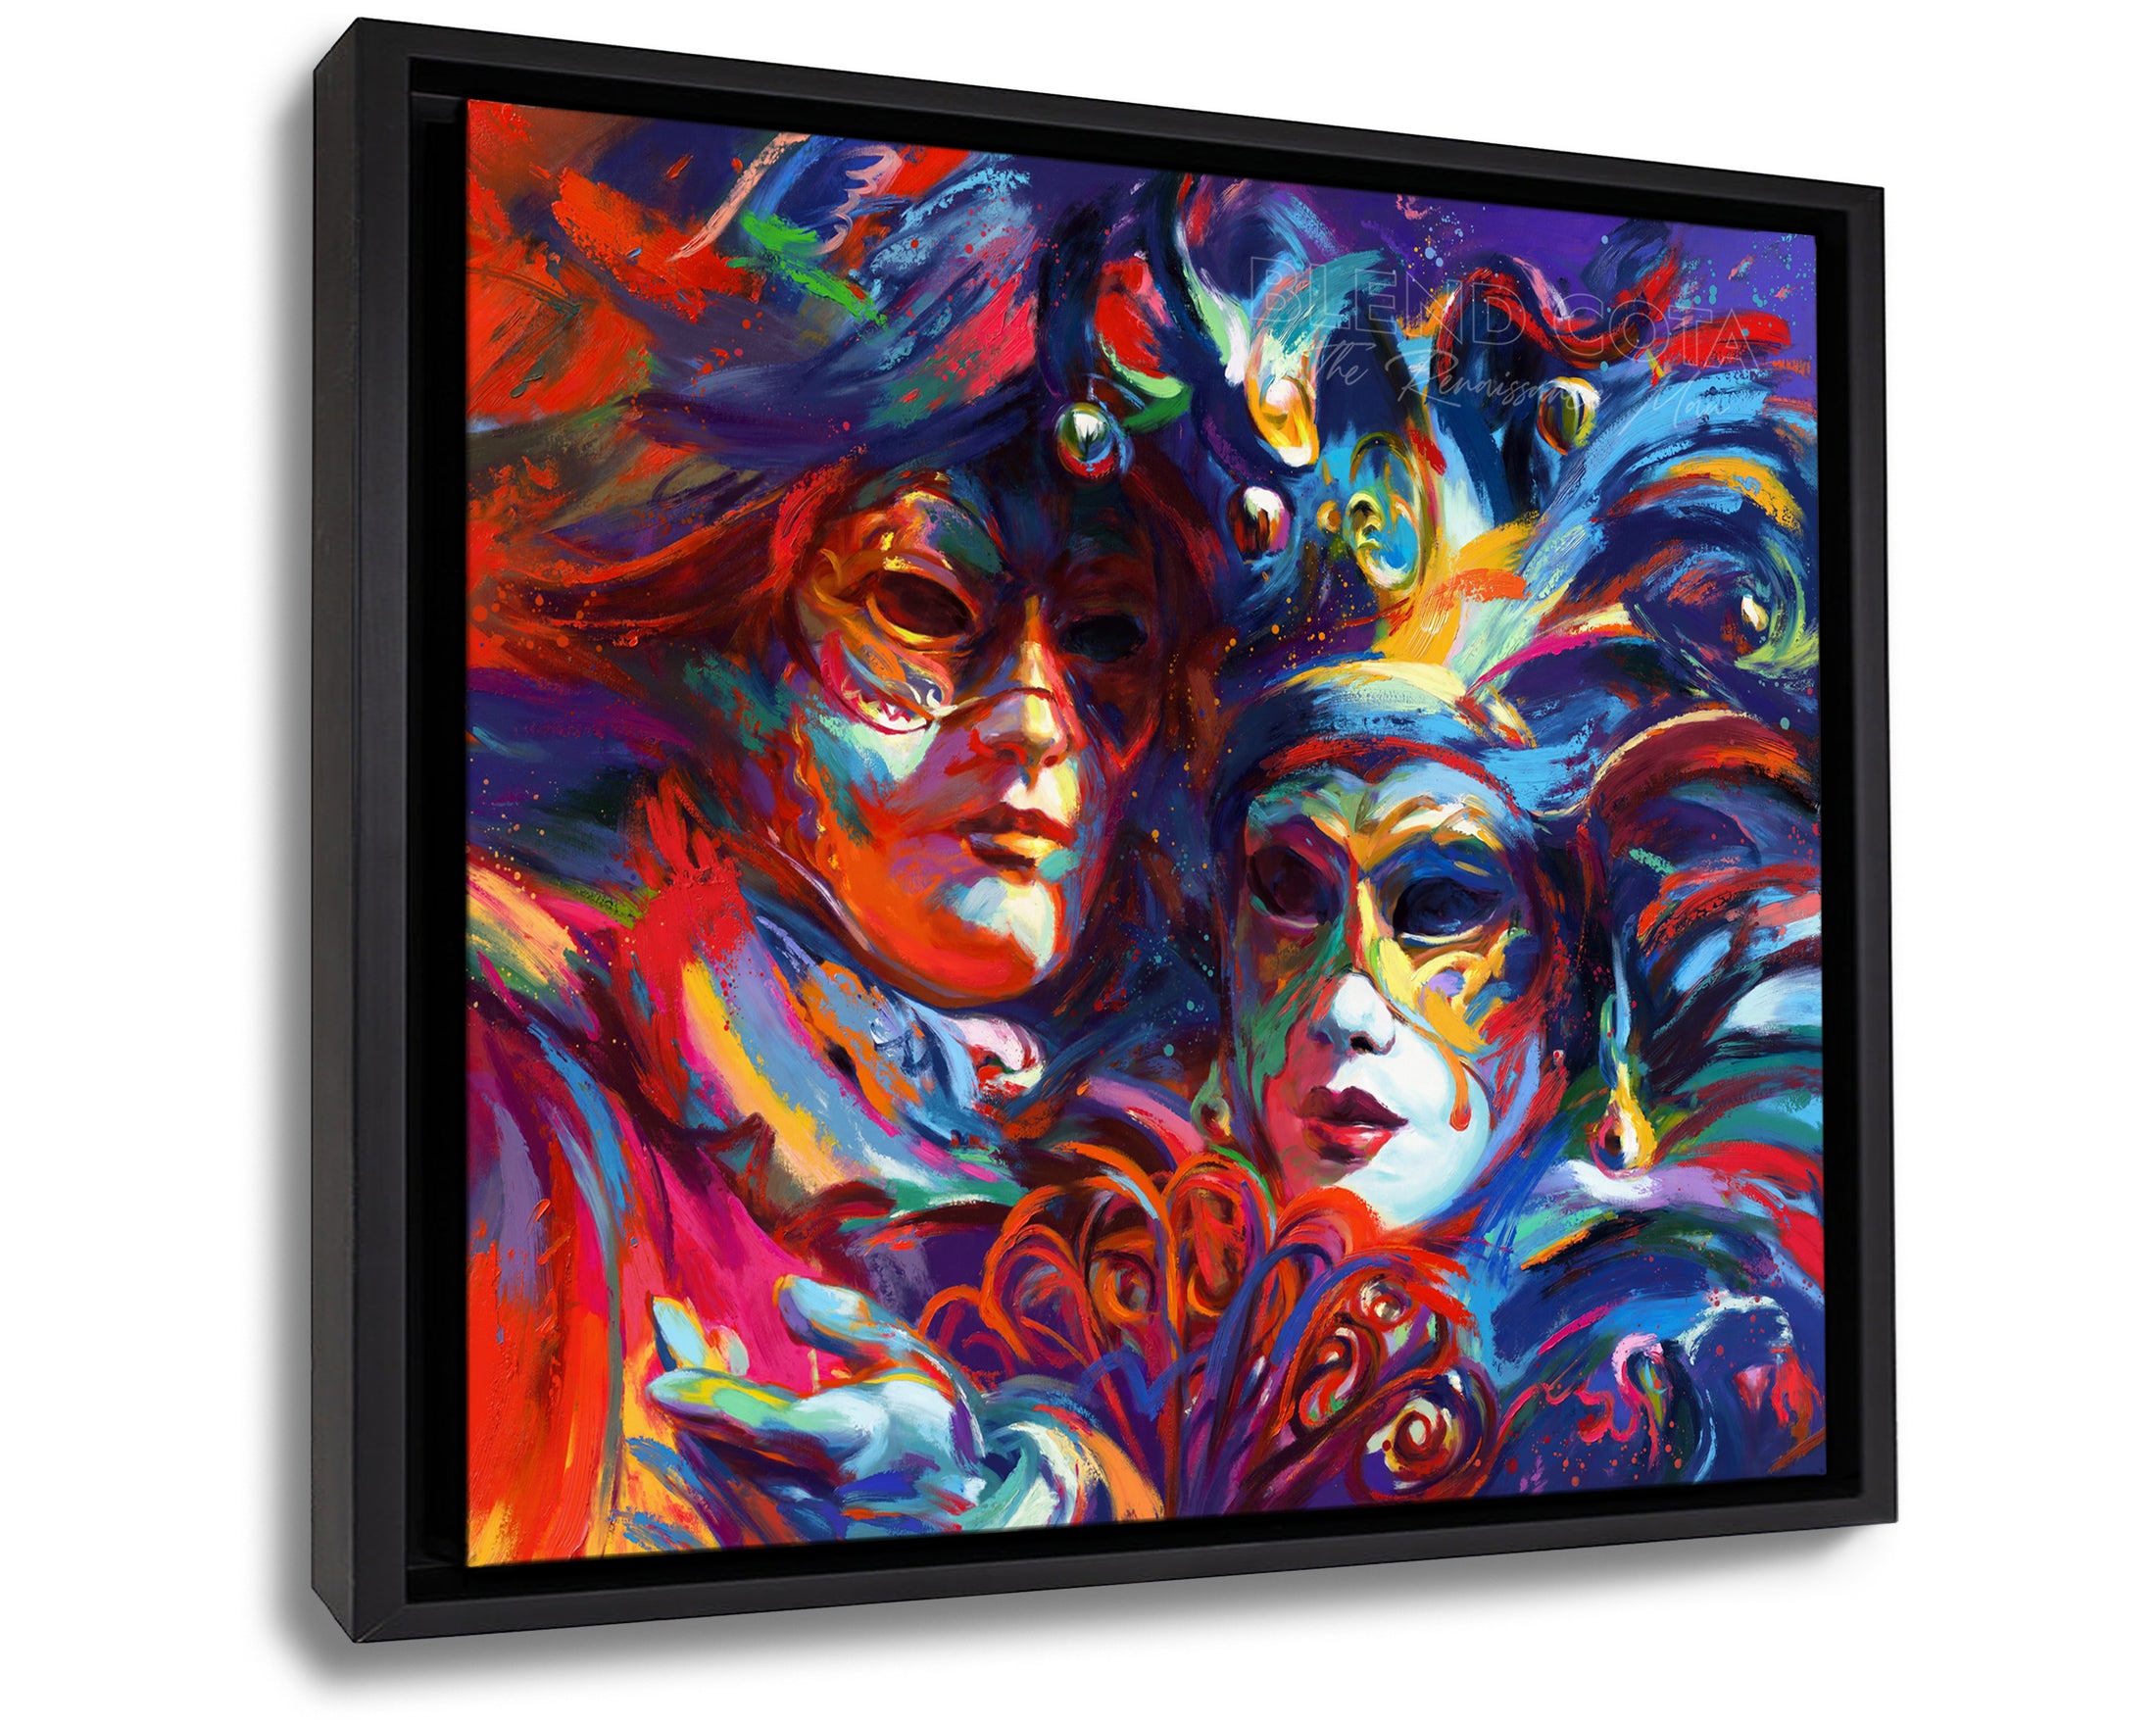 Framed Art print on canvas of blue, red and purple against the night sky, mystery and beauty surround these Venetian masks of Italy, Venice, the city of water holds many entrancing delights and dances in colorful brushstrokes, color expressionism style.